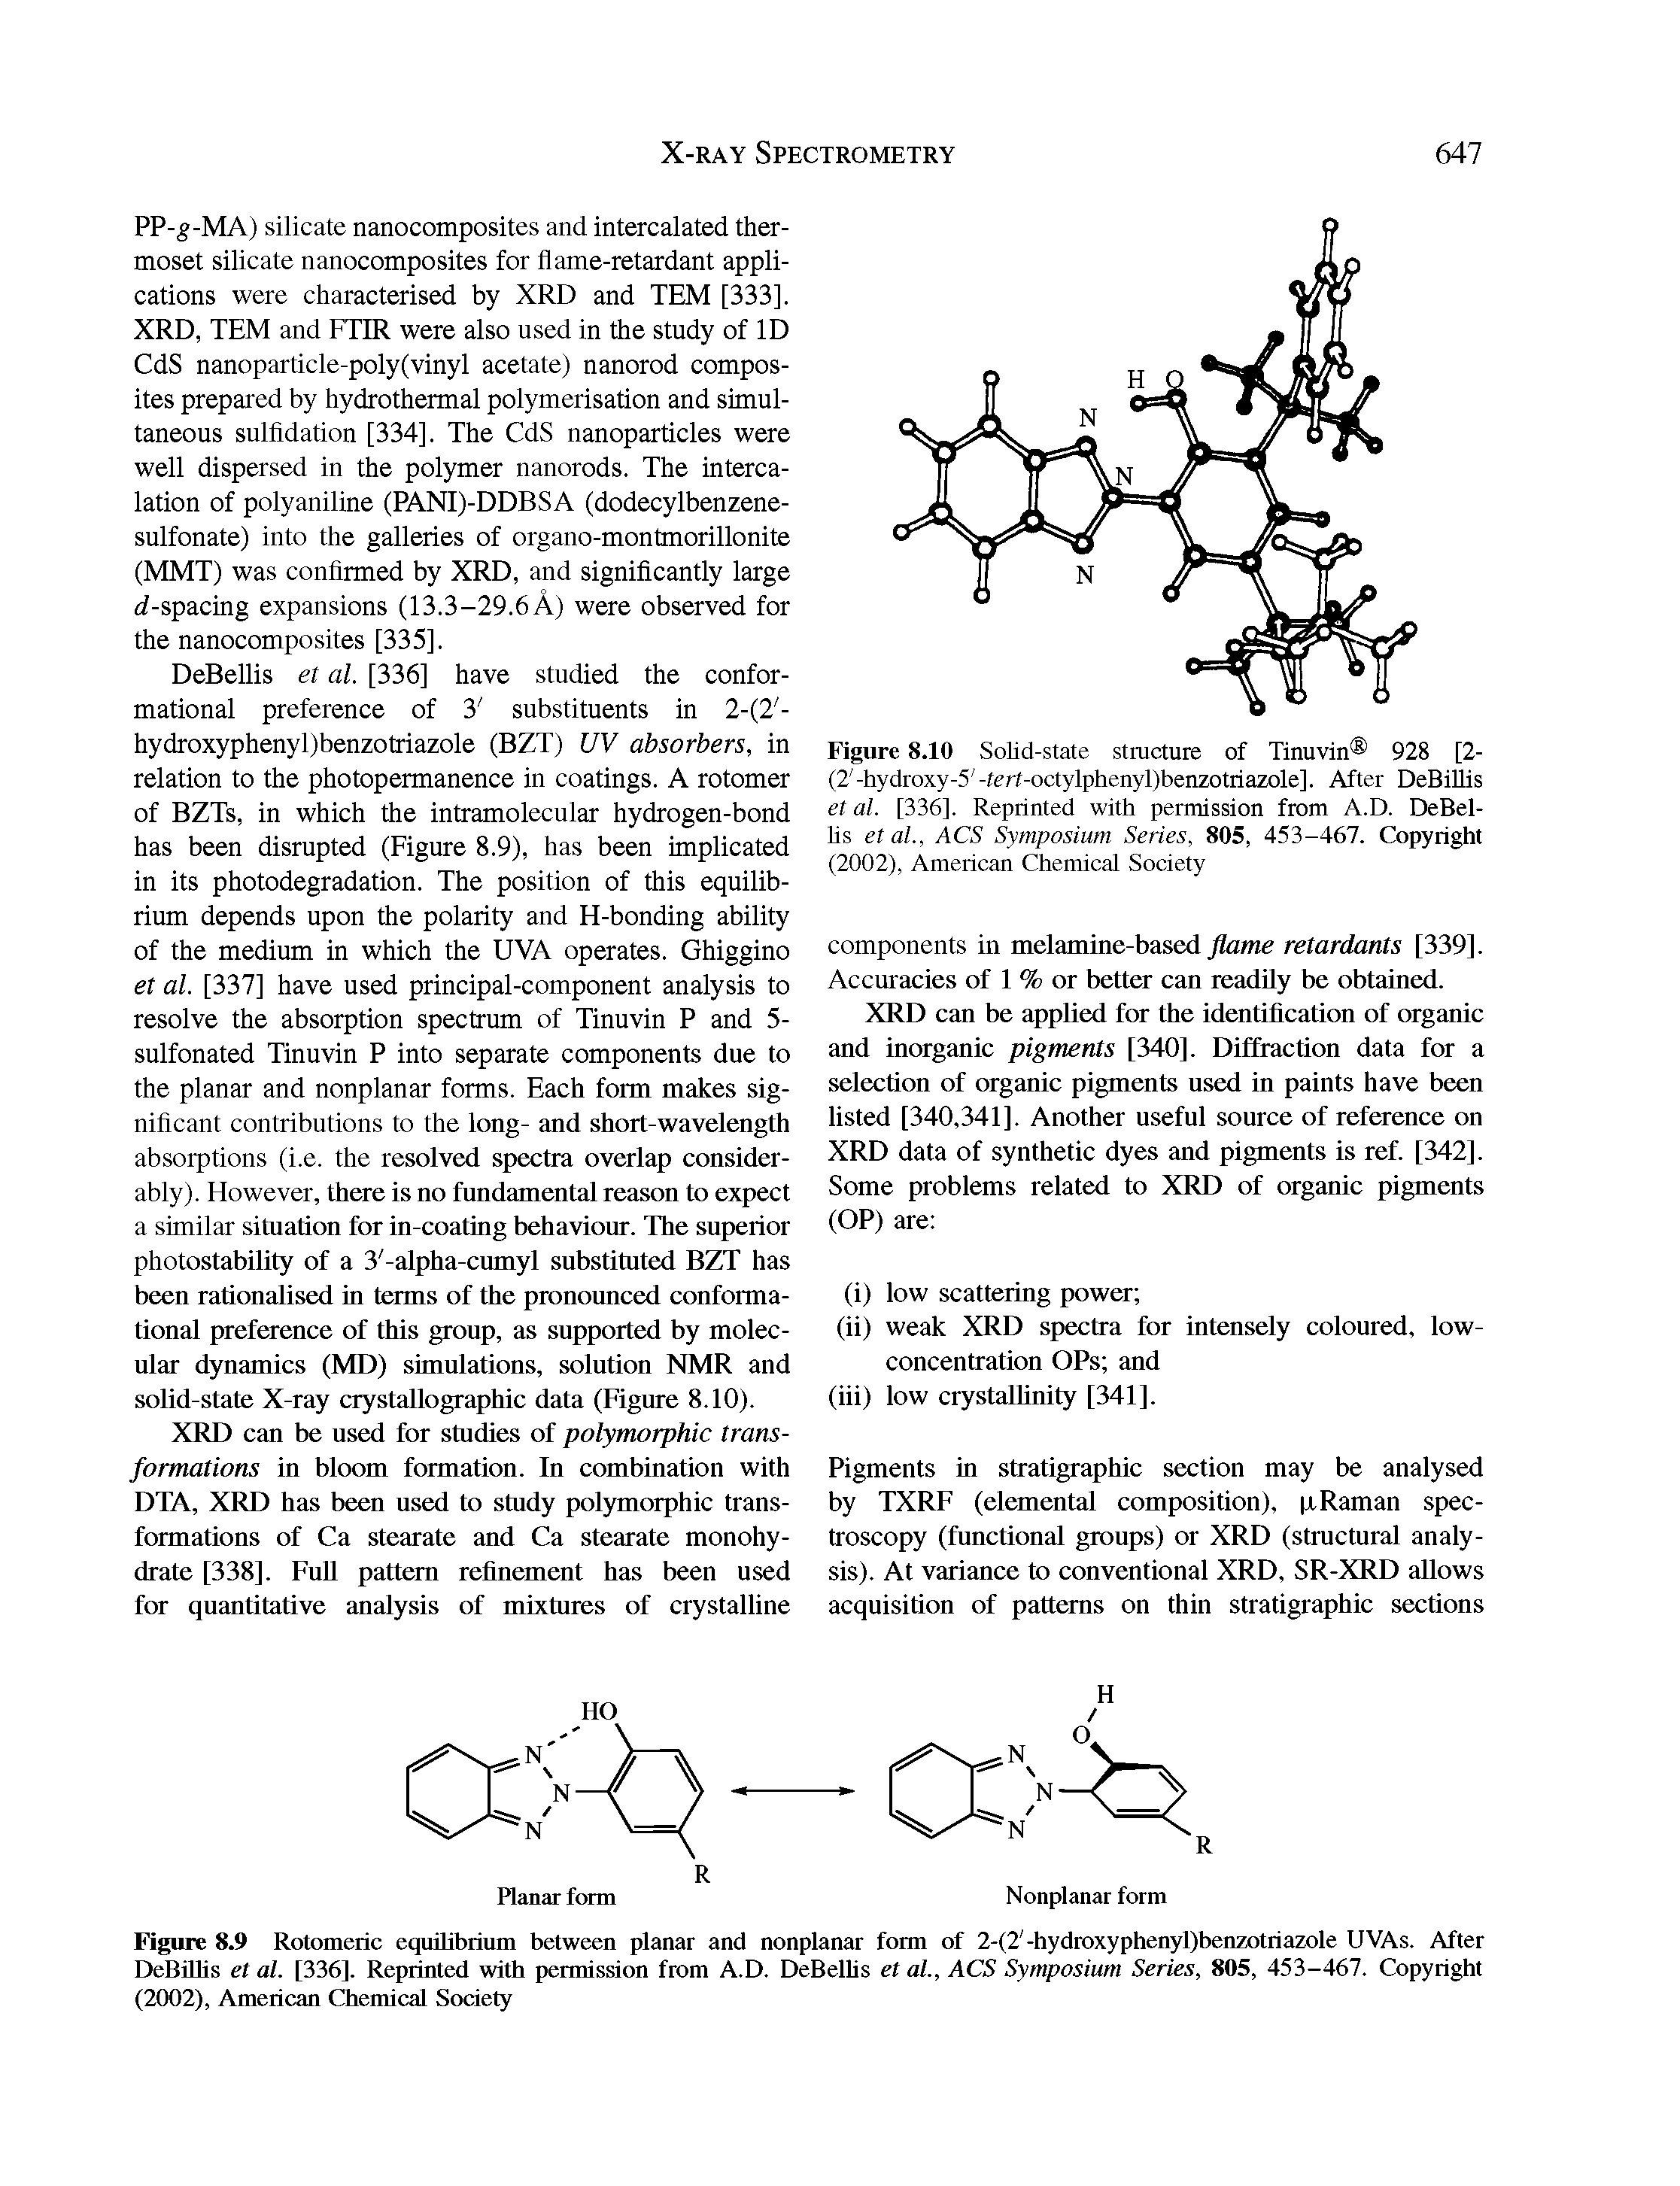 Figure 8.10 Solid-state stmcture of Tinuvin 928 [2-(2 -hydroxy-5 -tert-octylphenyl)benzotriazole]. After DeBillis et al. [336]. Reprinted with permission from A.D. DeBellis et al., ACS Symposium Series, 805, 453-467. Copyright (2002), American Chemical Society...